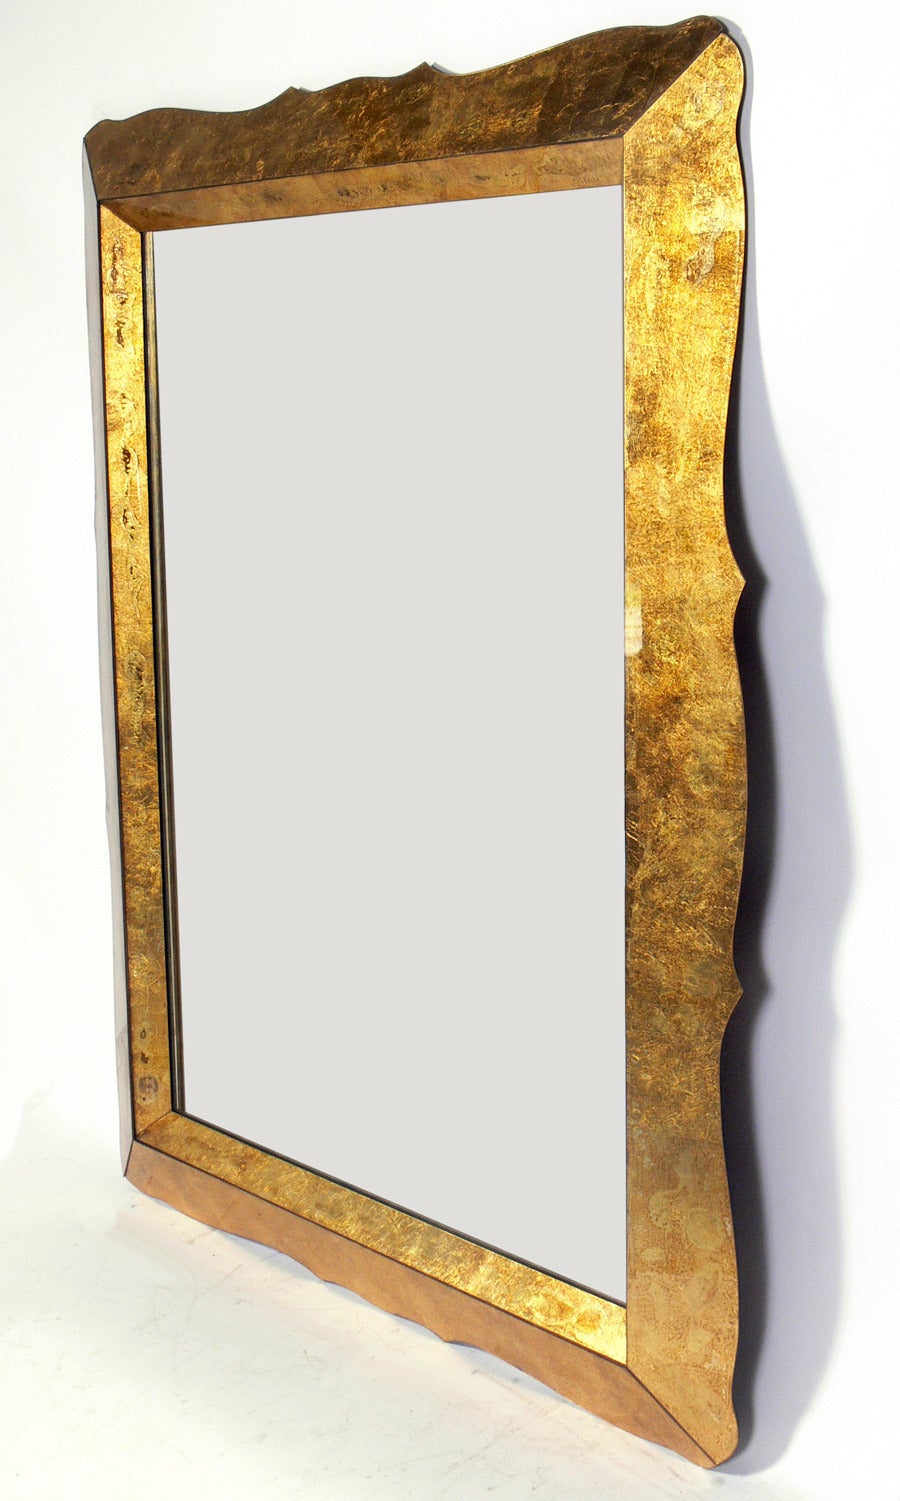 Large Scale Gold Leaf Églomisé Mirror, American, circa 1940s. Retains its wonderful original patina to the mirror and gilding. At just over five feet tall by just over four feet wide, this mirror exhibits large scale glamour. It can be mounted